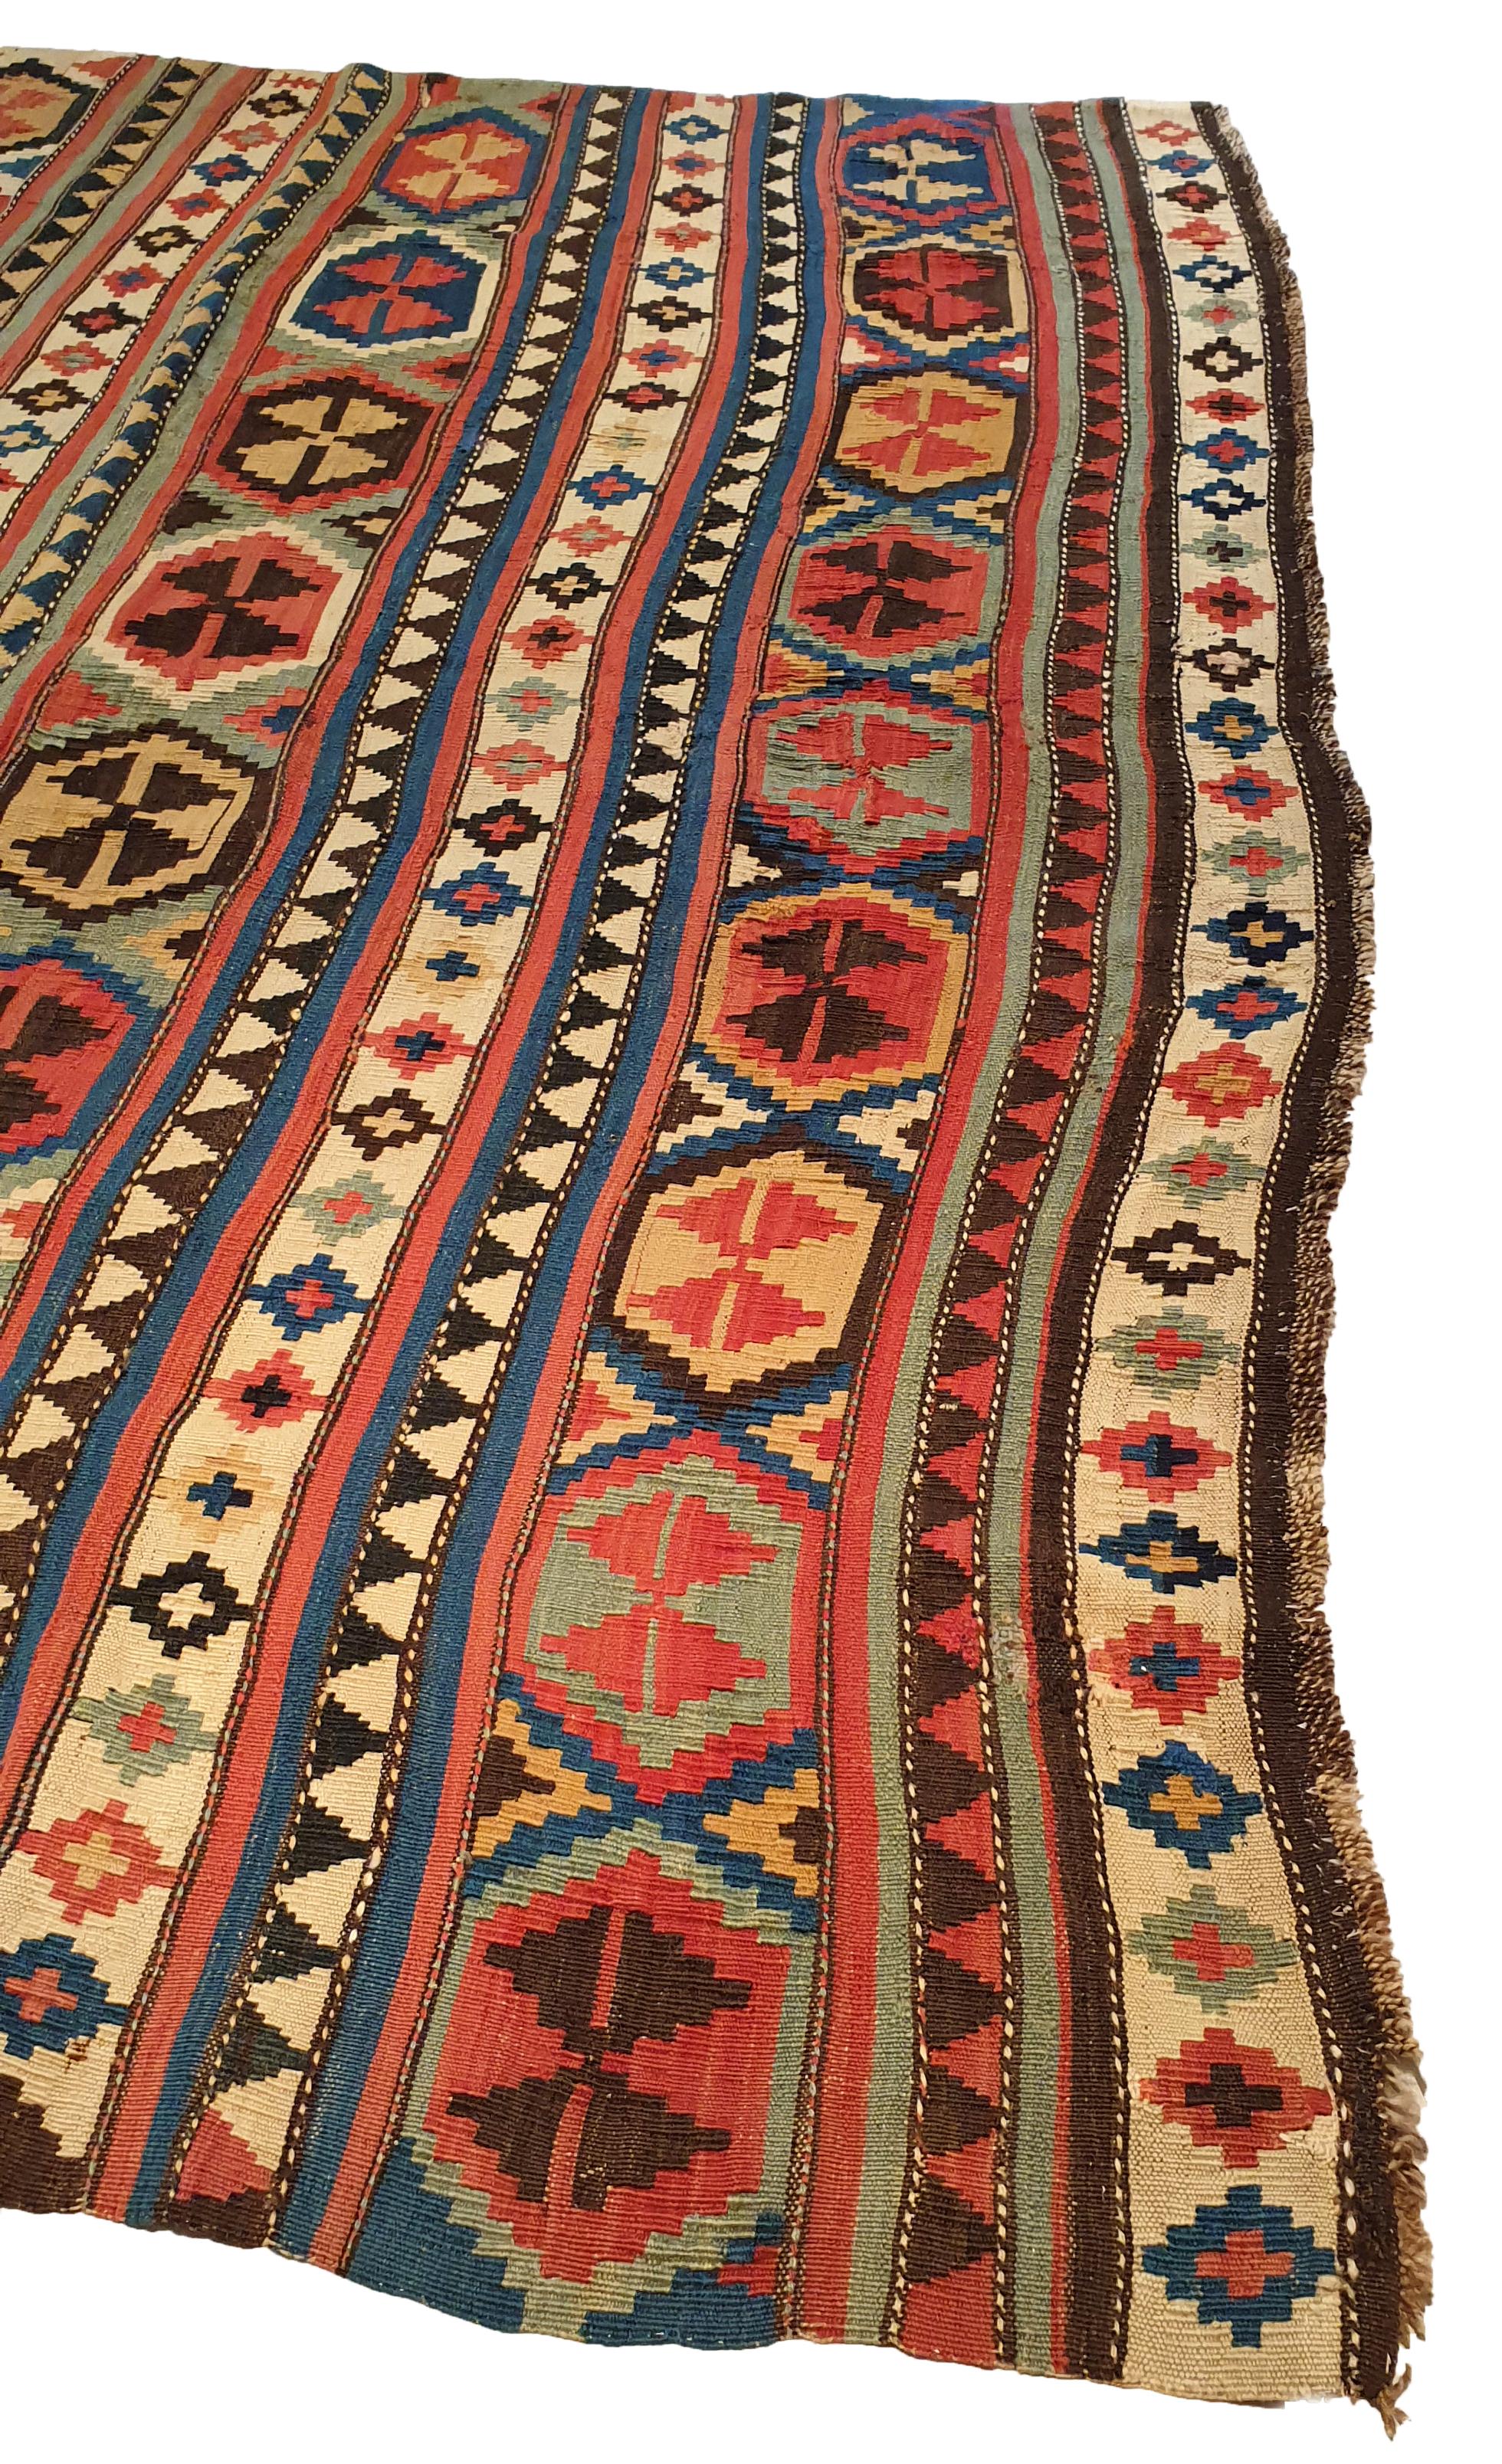 Hand-Woven 754 - Kilim from the Late 19th Century Caucasian